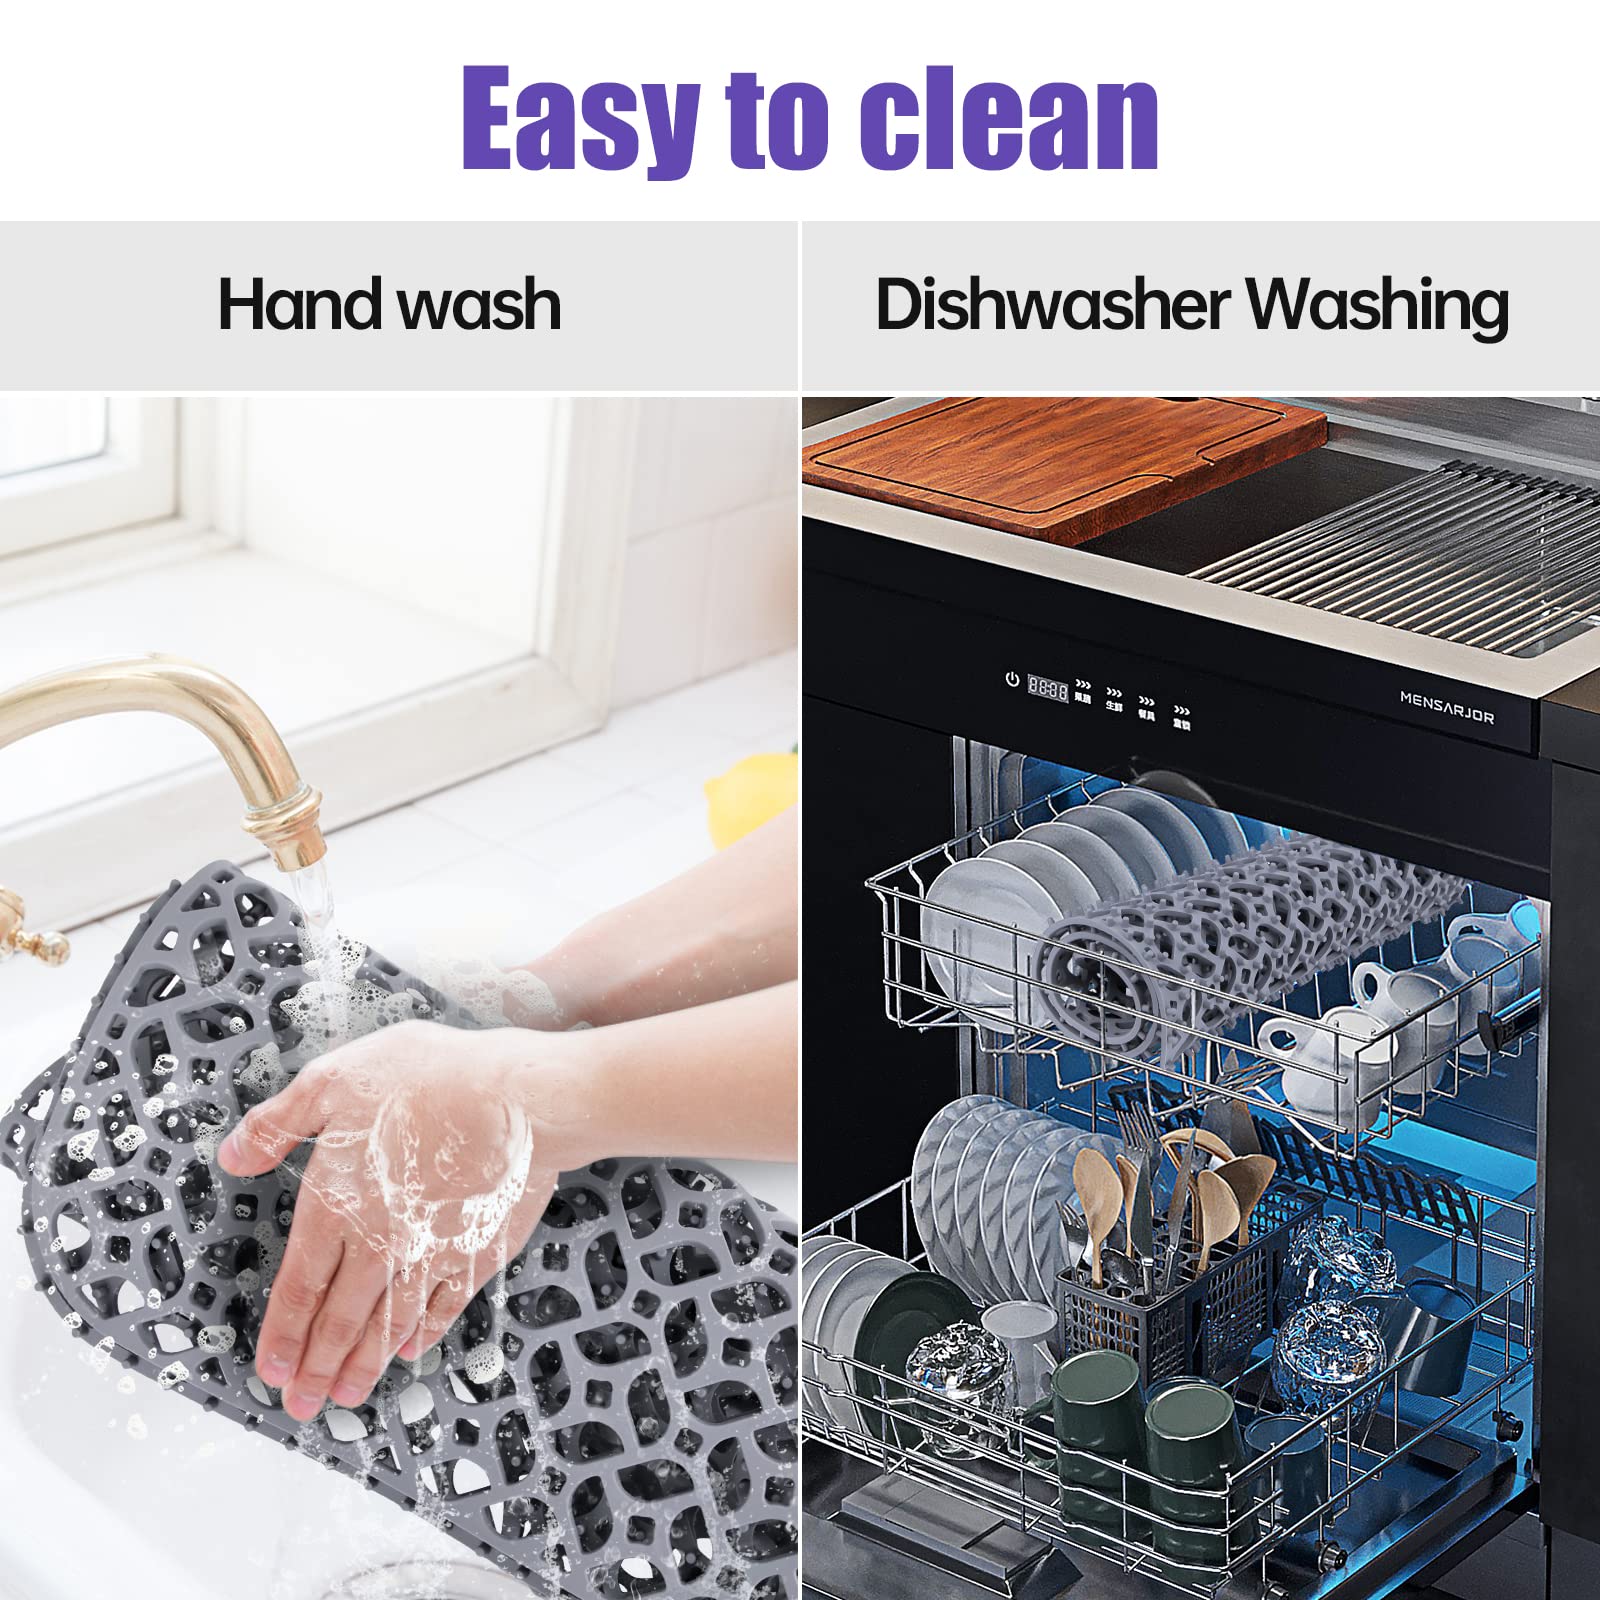 JUSTOGO Silicone Sink Mat, Kitchen Sink Protectors for Kitchen Sink Grid Accessory with Center Drain 24.8"x 13",1 PCS Non-slip Folding Sink Mats for Bottom of Farmhouse Stainless Steel Porcelain Sink